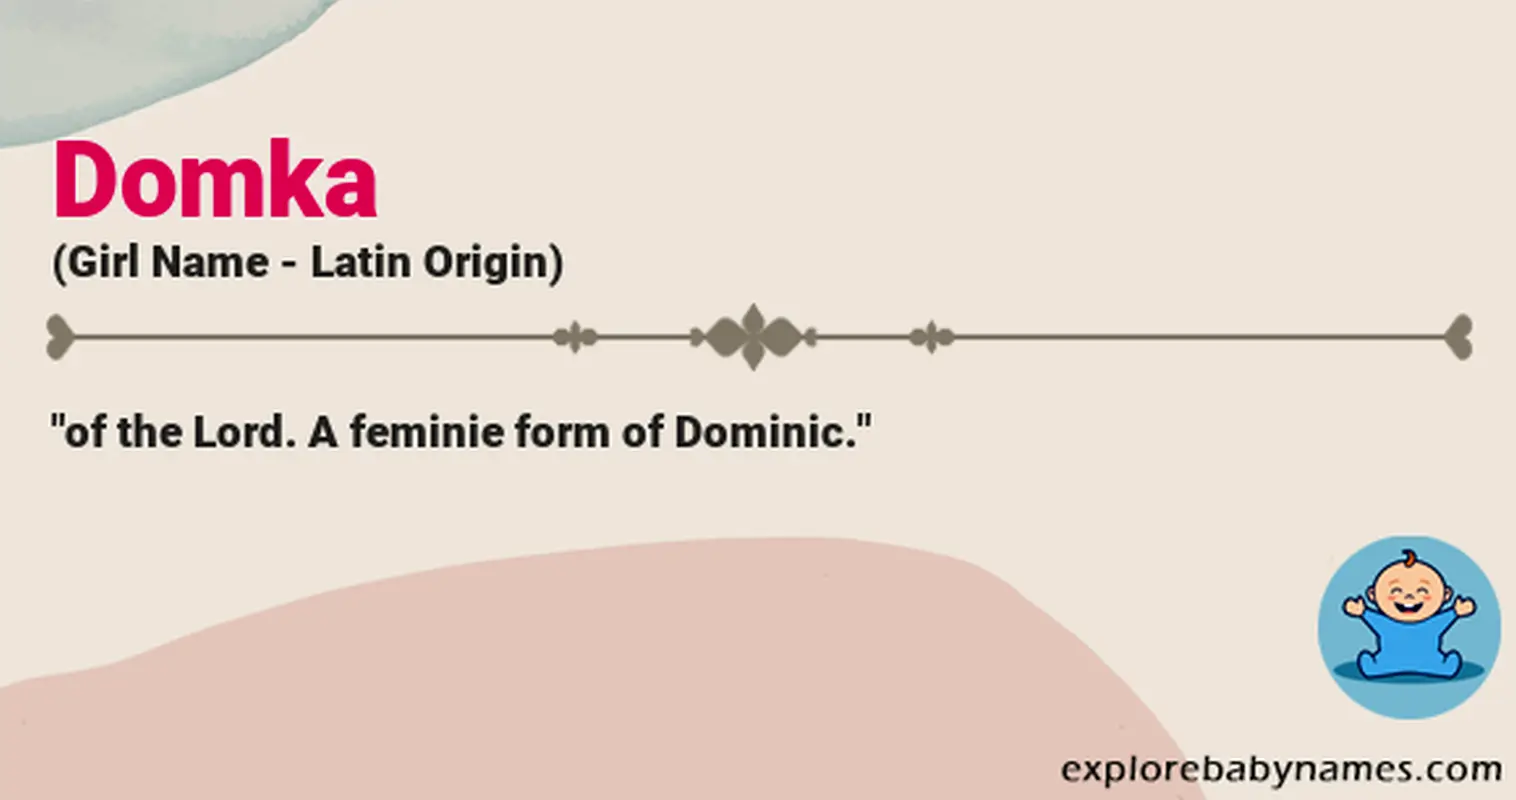 Meaning of Domka